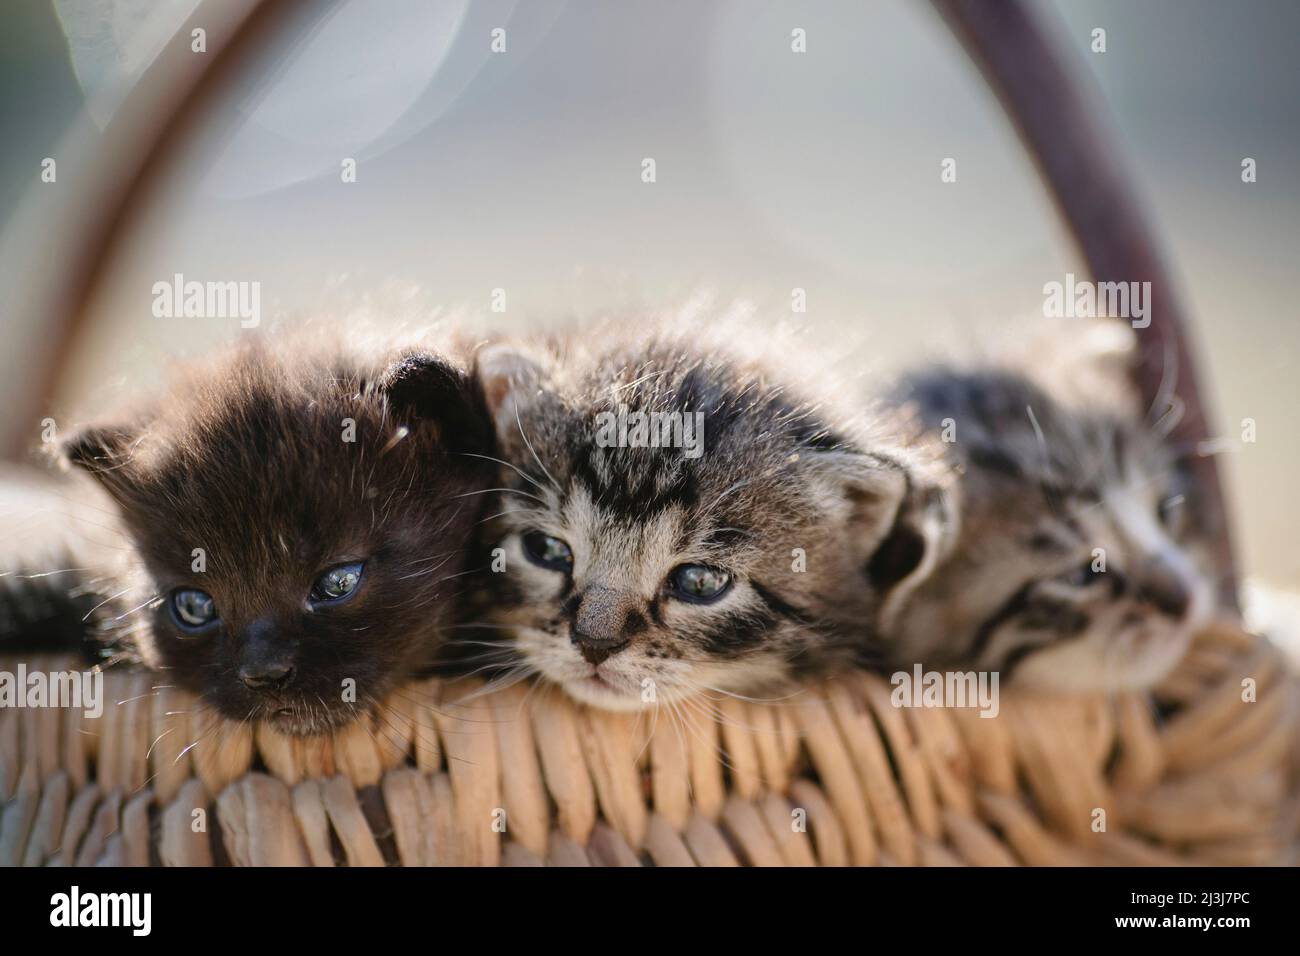 Three kittens in a basket. Stock Photo